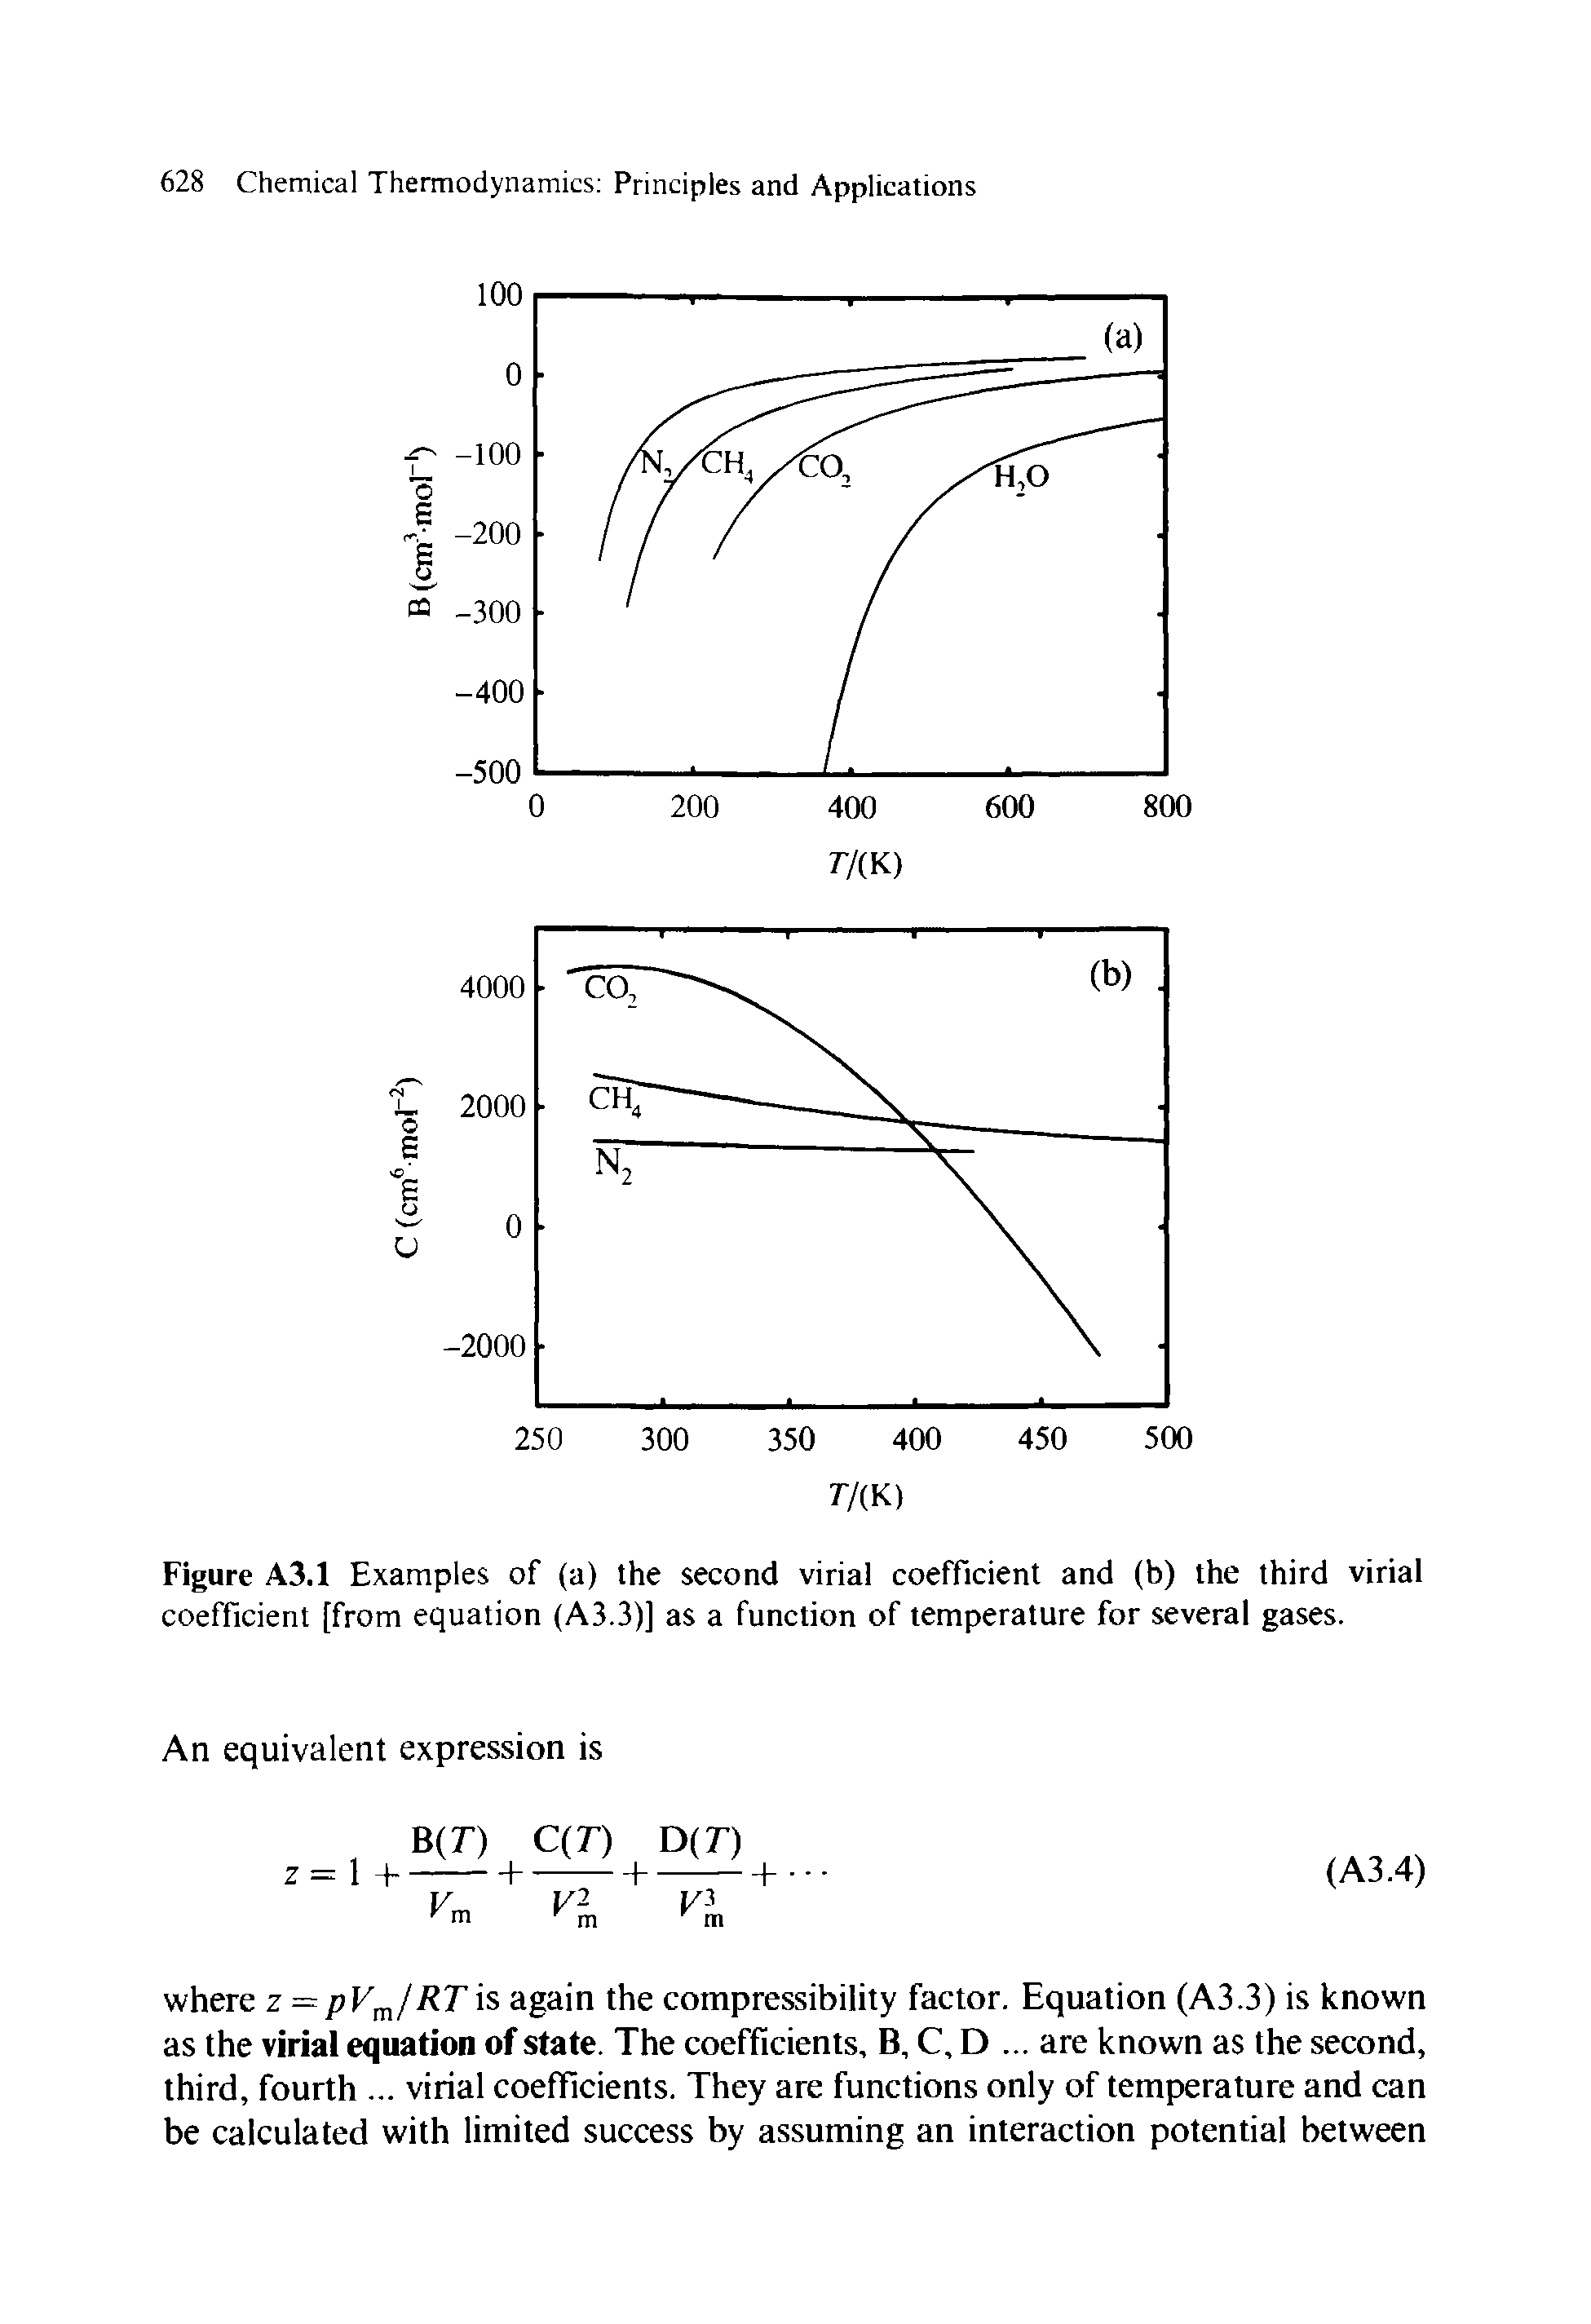 Figure A3.1 Examples of (a) the second virial coefficient and (b) the third virial coefficient [from equation (A3.3)] as a function of temperature for several gases.